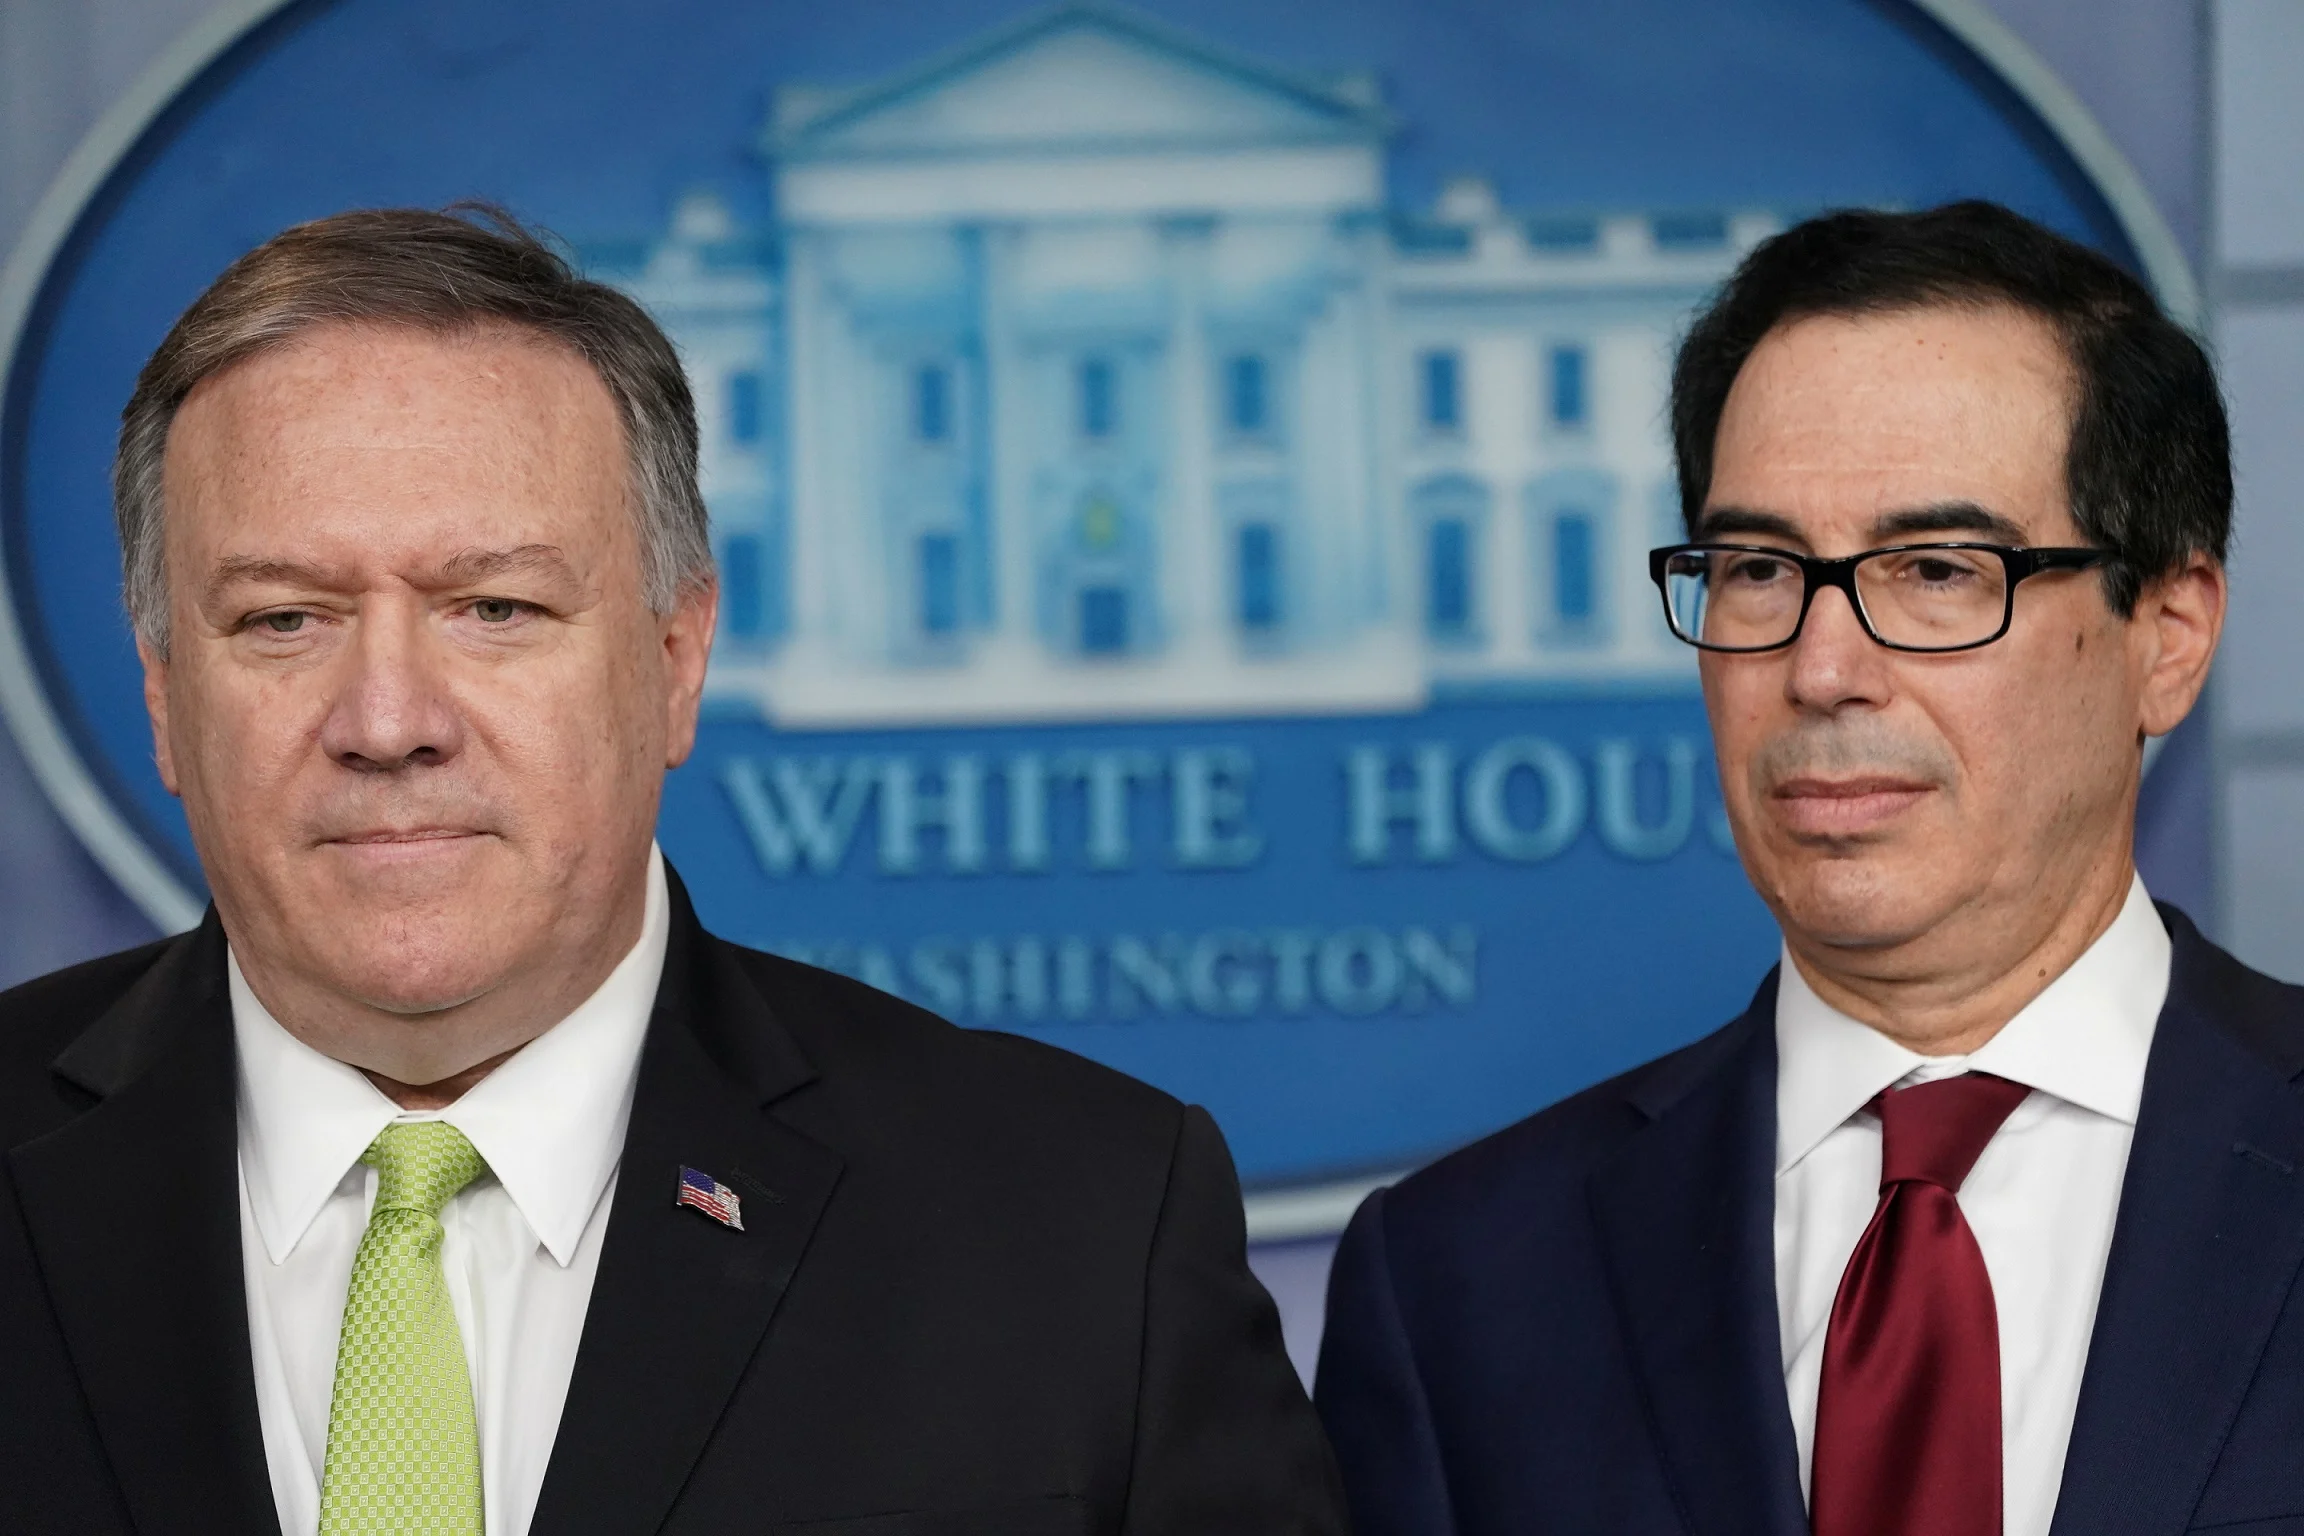 U.s. Secretary Of State Pompeo And Treasury Secretary Mnuchin Announce Sanctions On Iran During Briefing At The White House In Washington